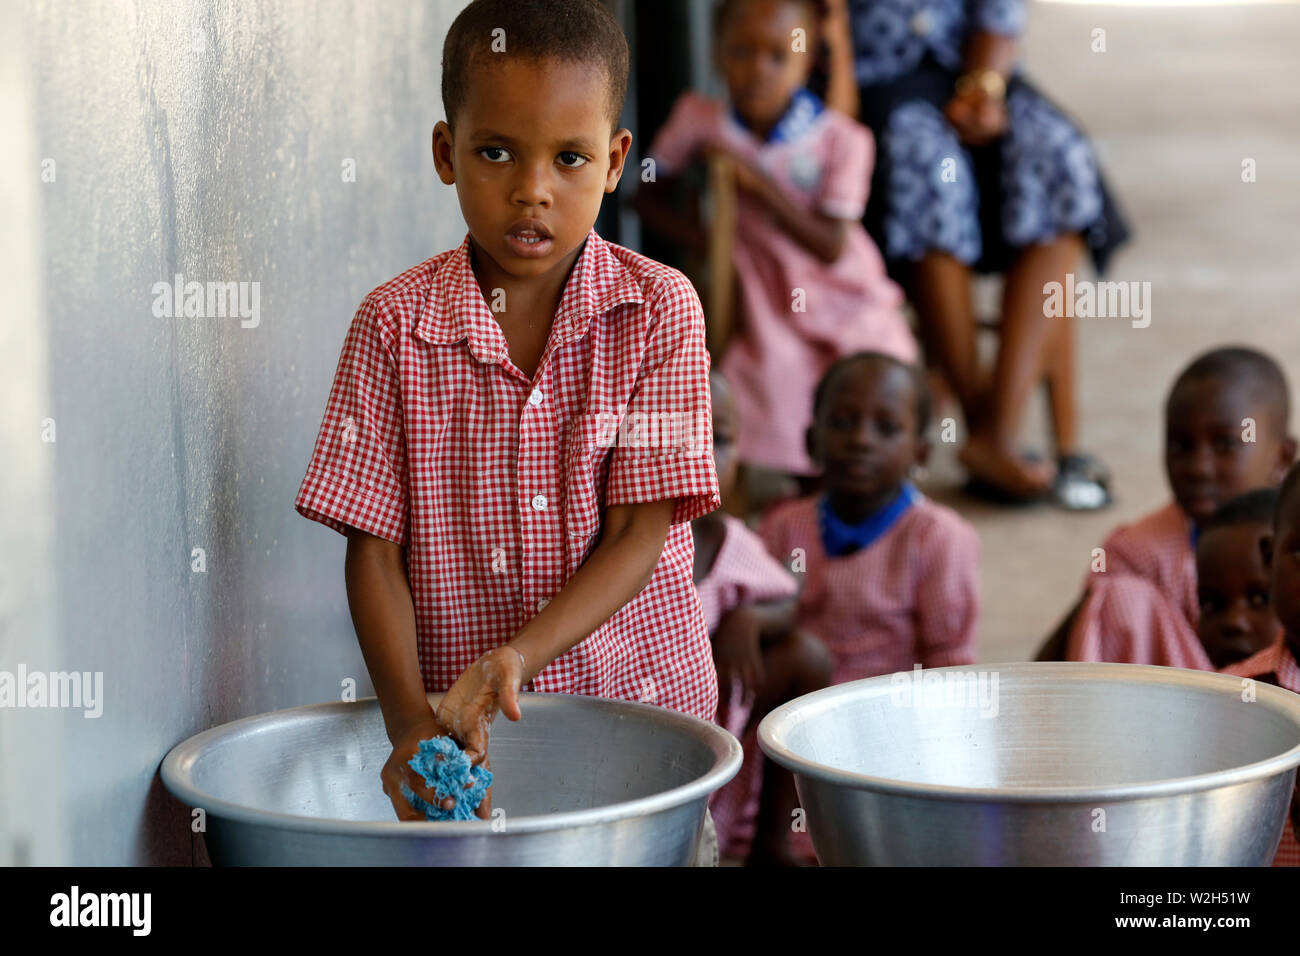 African primary school. A school boy washing his hands. Lome. Togo. Stock Photo